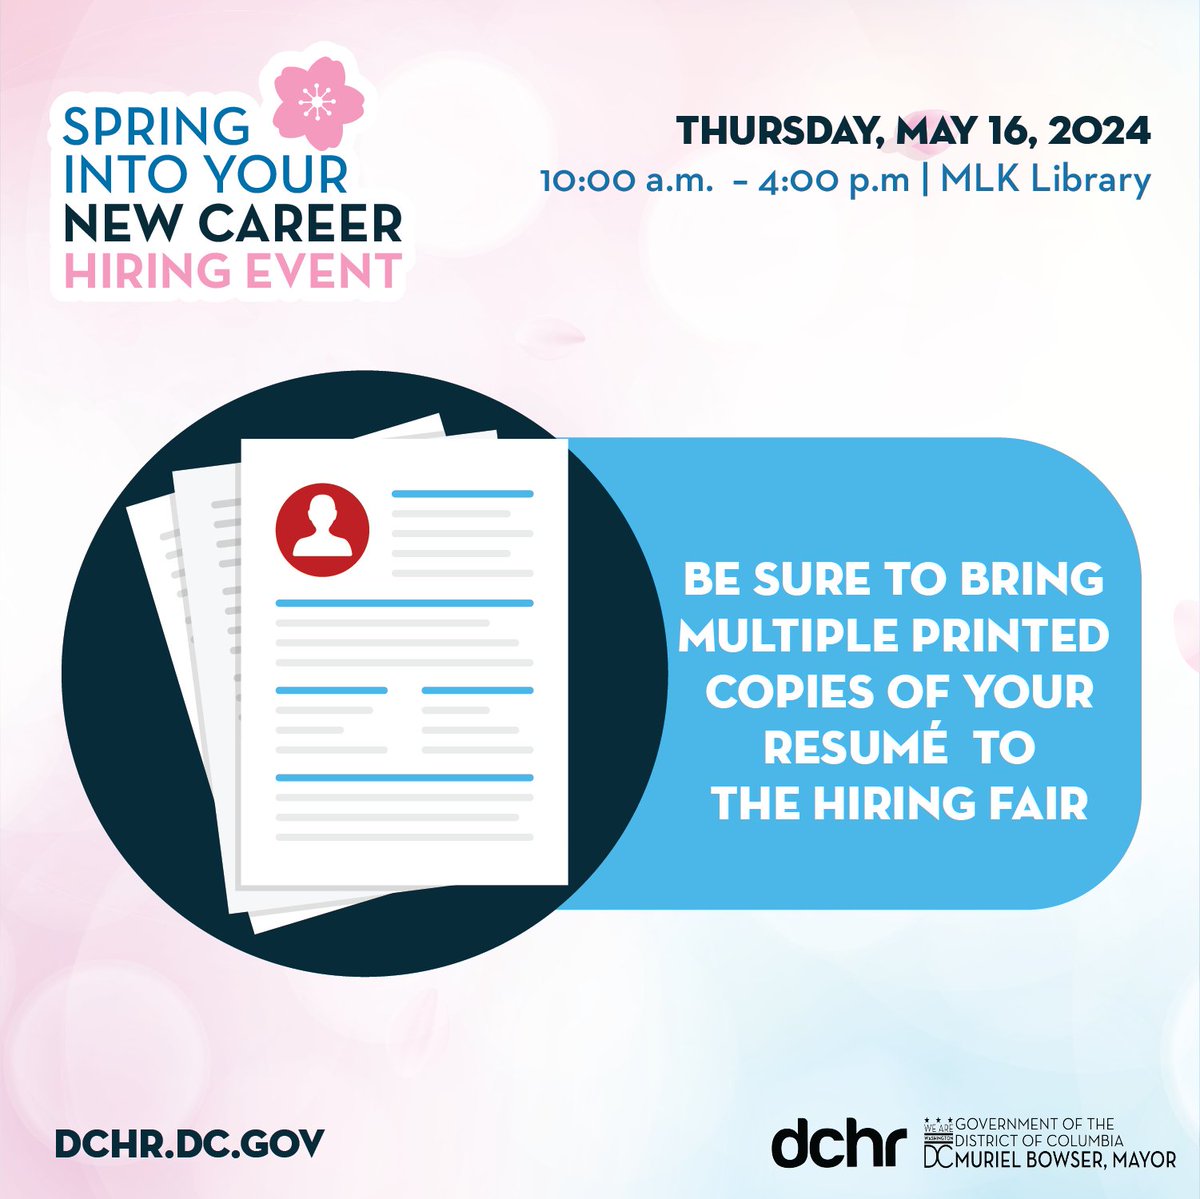 Gear up for @DCHRDC Spring Hiring Fair at MLK Library:

-Print your resumes at your local library beforehand to beat the rush.
-Know the event's time & location.
-Bring a book for any wait time.
-Stroll the library, grab a coffee.
-Snap pics, tag us, & stay patient! Good luck!